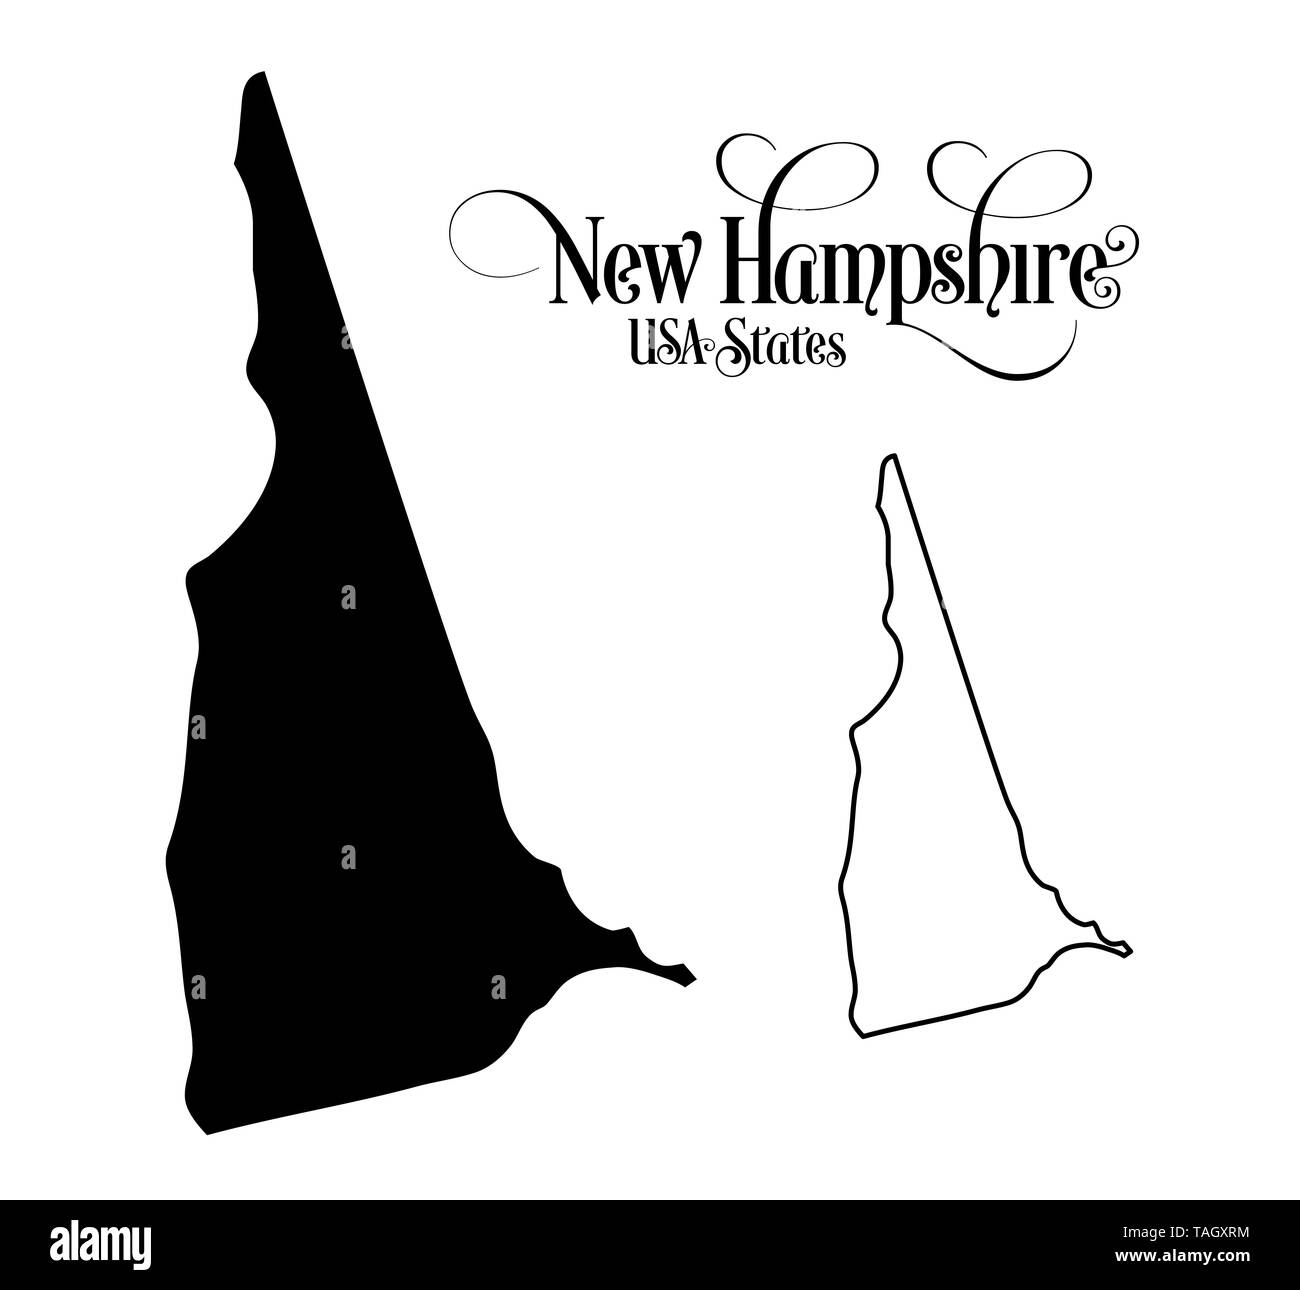 Map of The United States of America (USA) State of New Hampshire - Illustration on White Background. Stock Photo